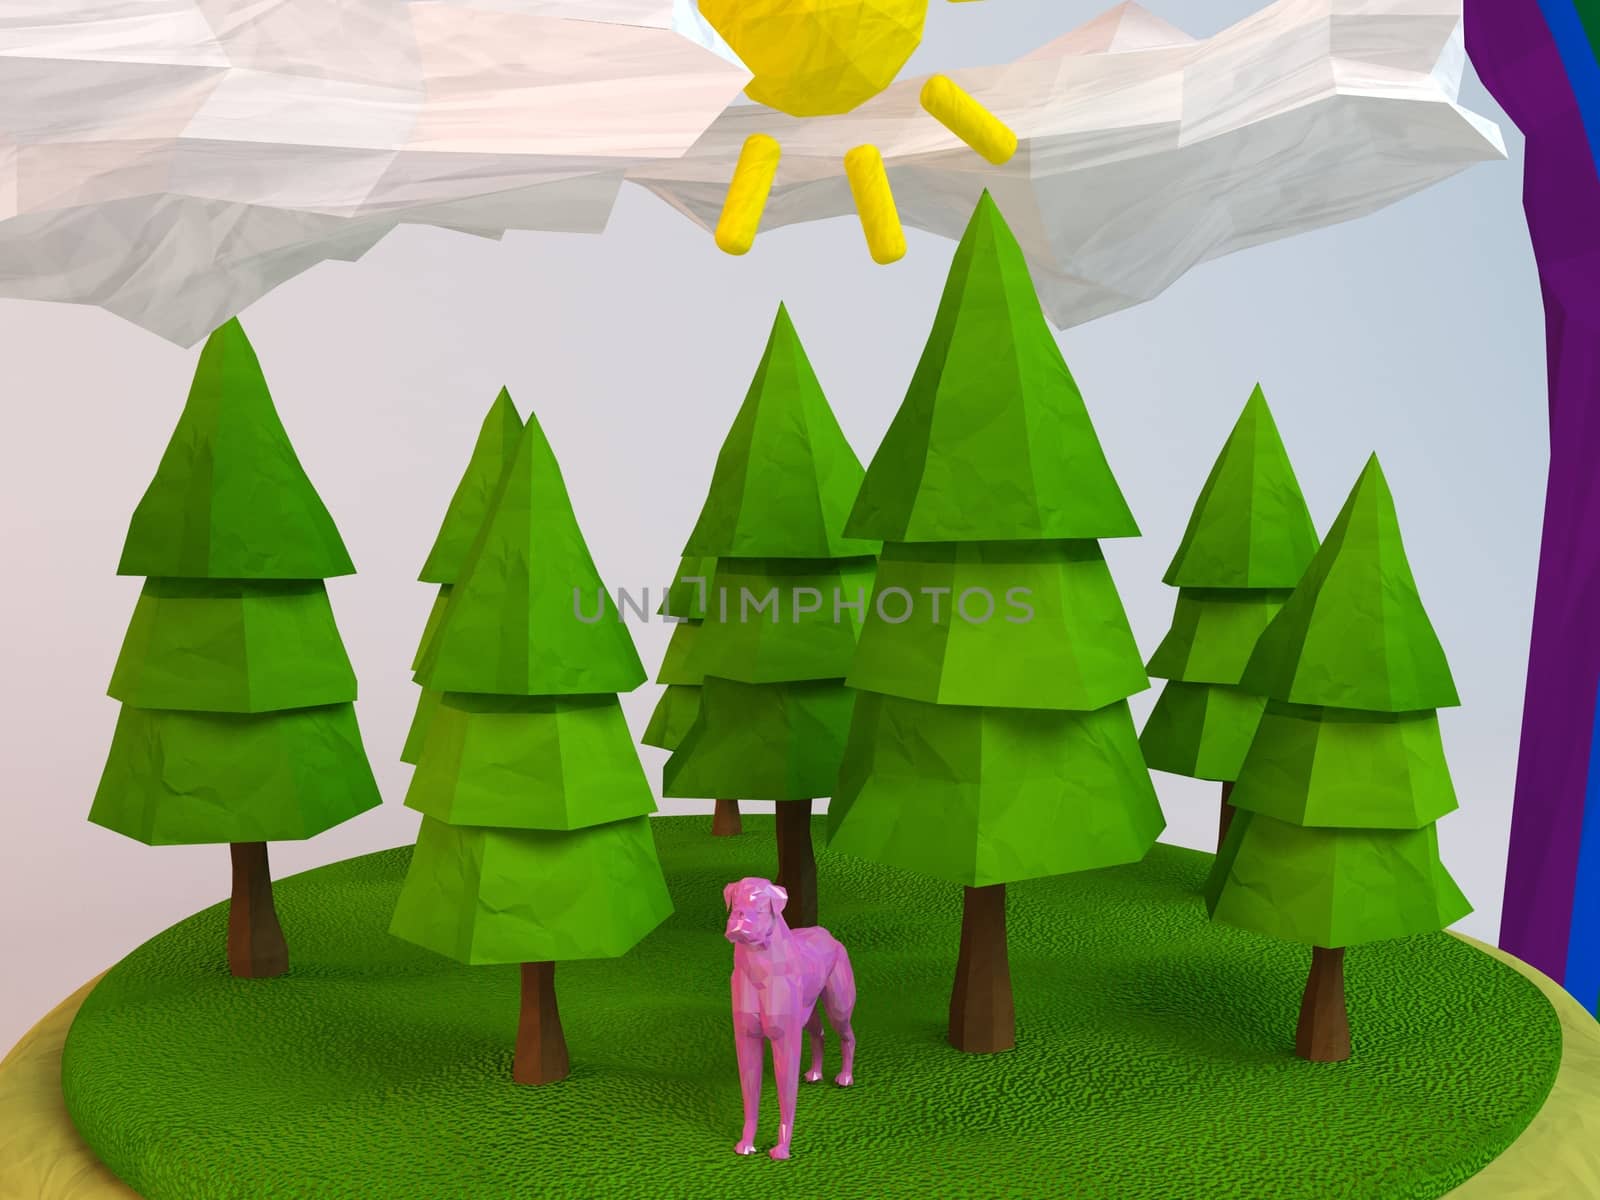 3d dog inside a low-poly green scene with sun, trees, clouds and a rainbow